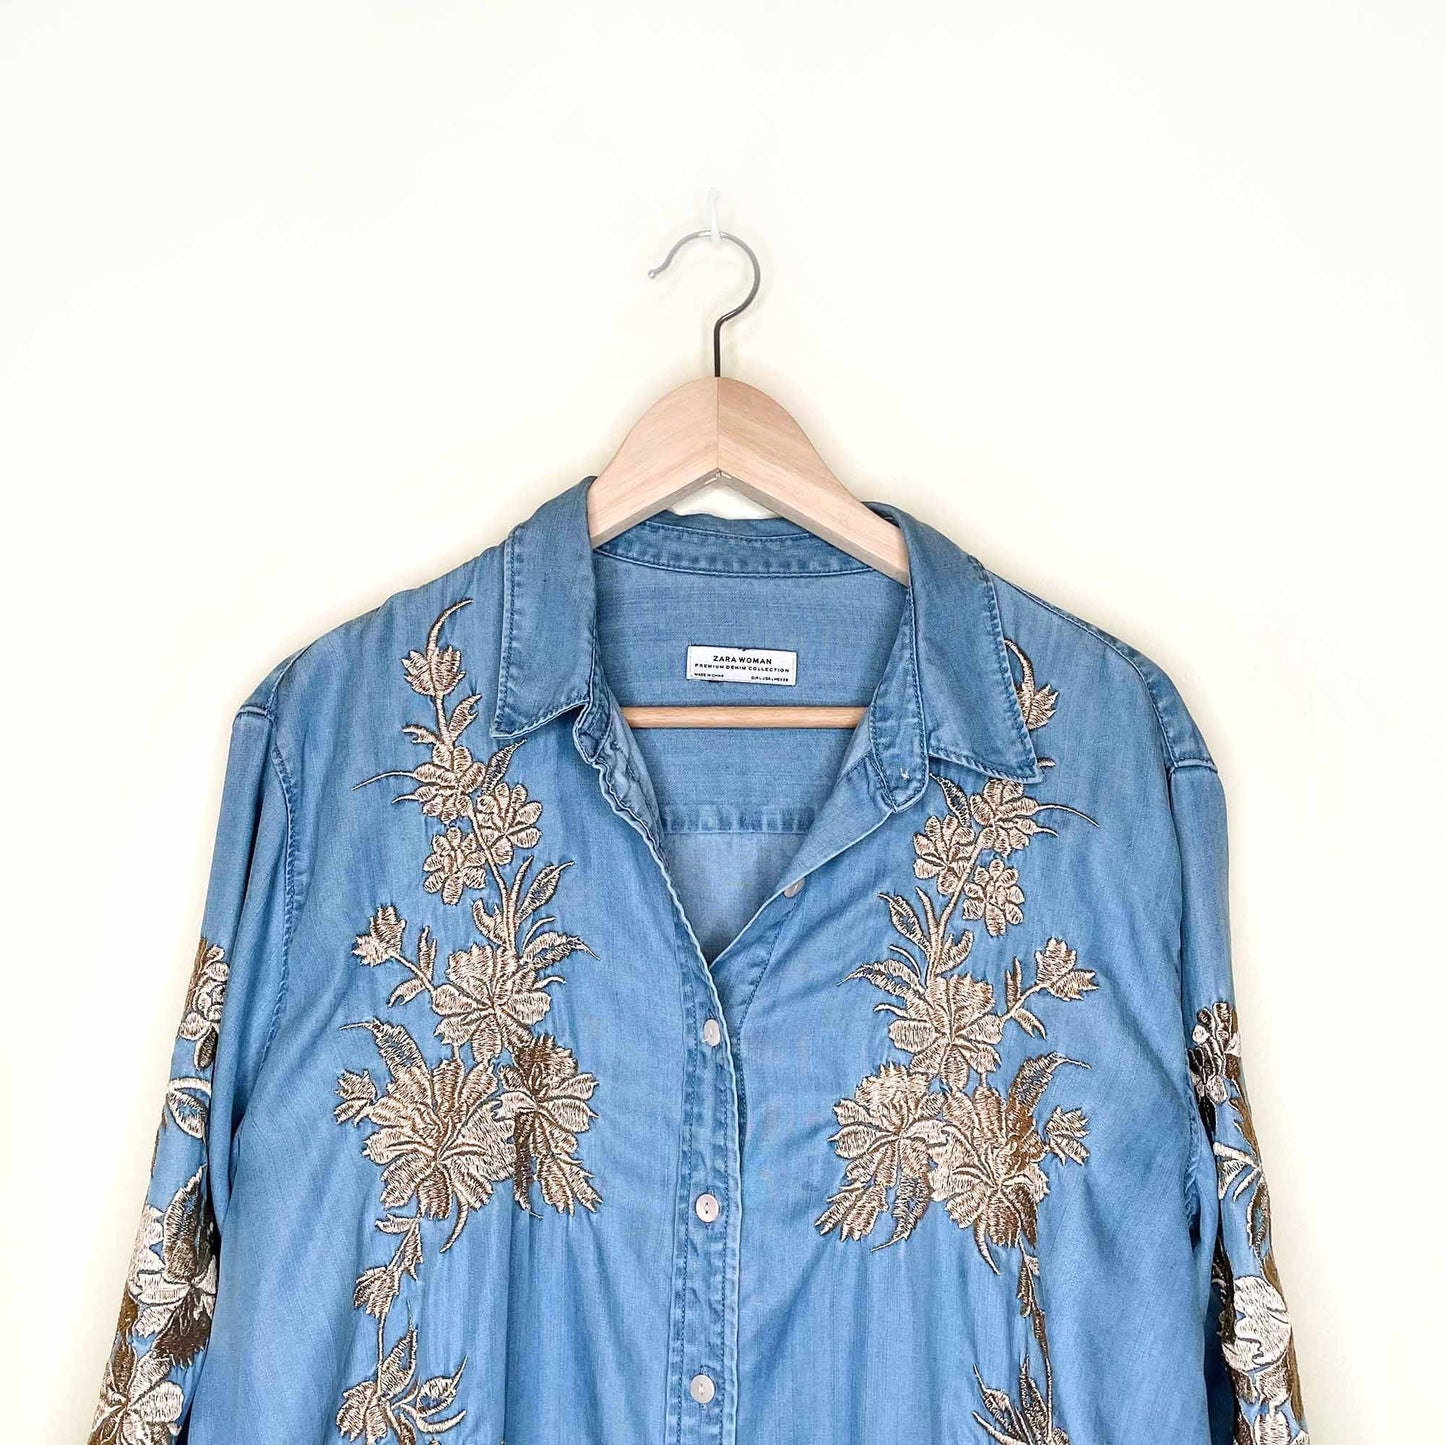 zara chambray button down with gold floral embroidery - size large